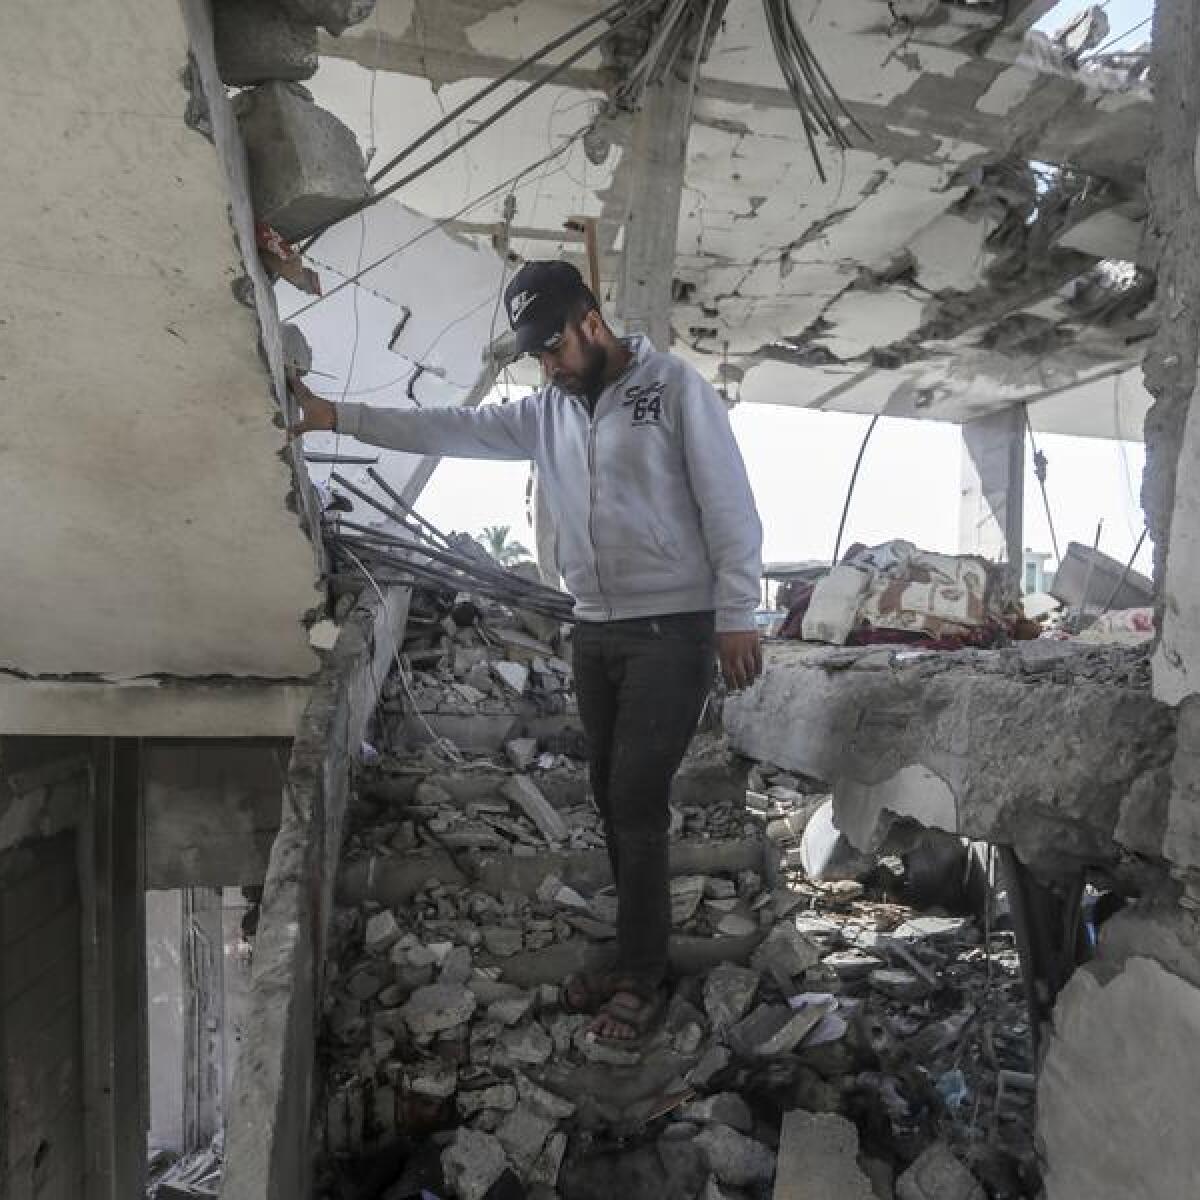 A Palestinian man stands in the ruins of a home in southern Gaza.